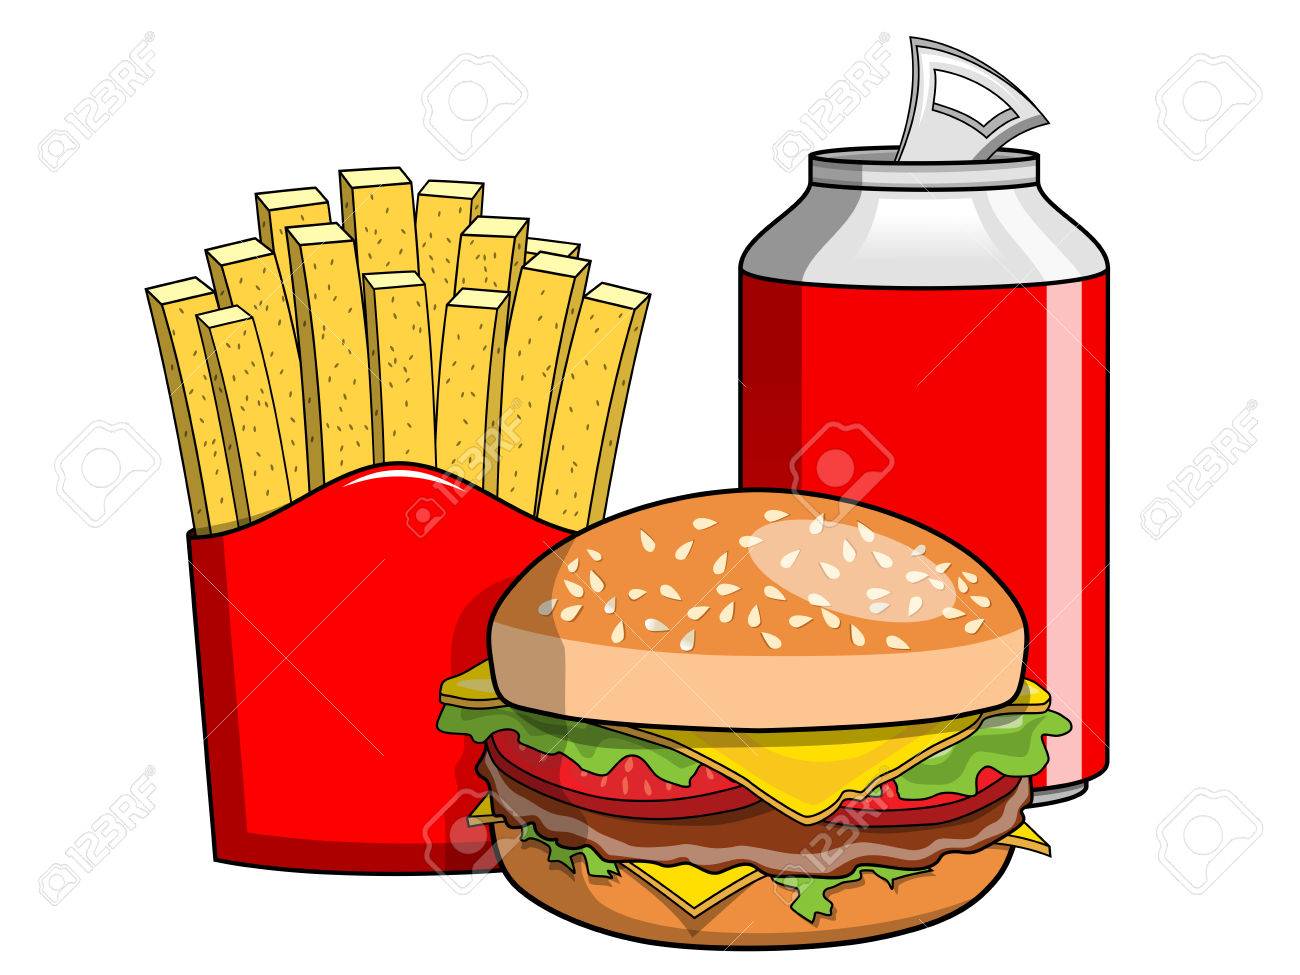 Hamburger french fries and coke can isolated.